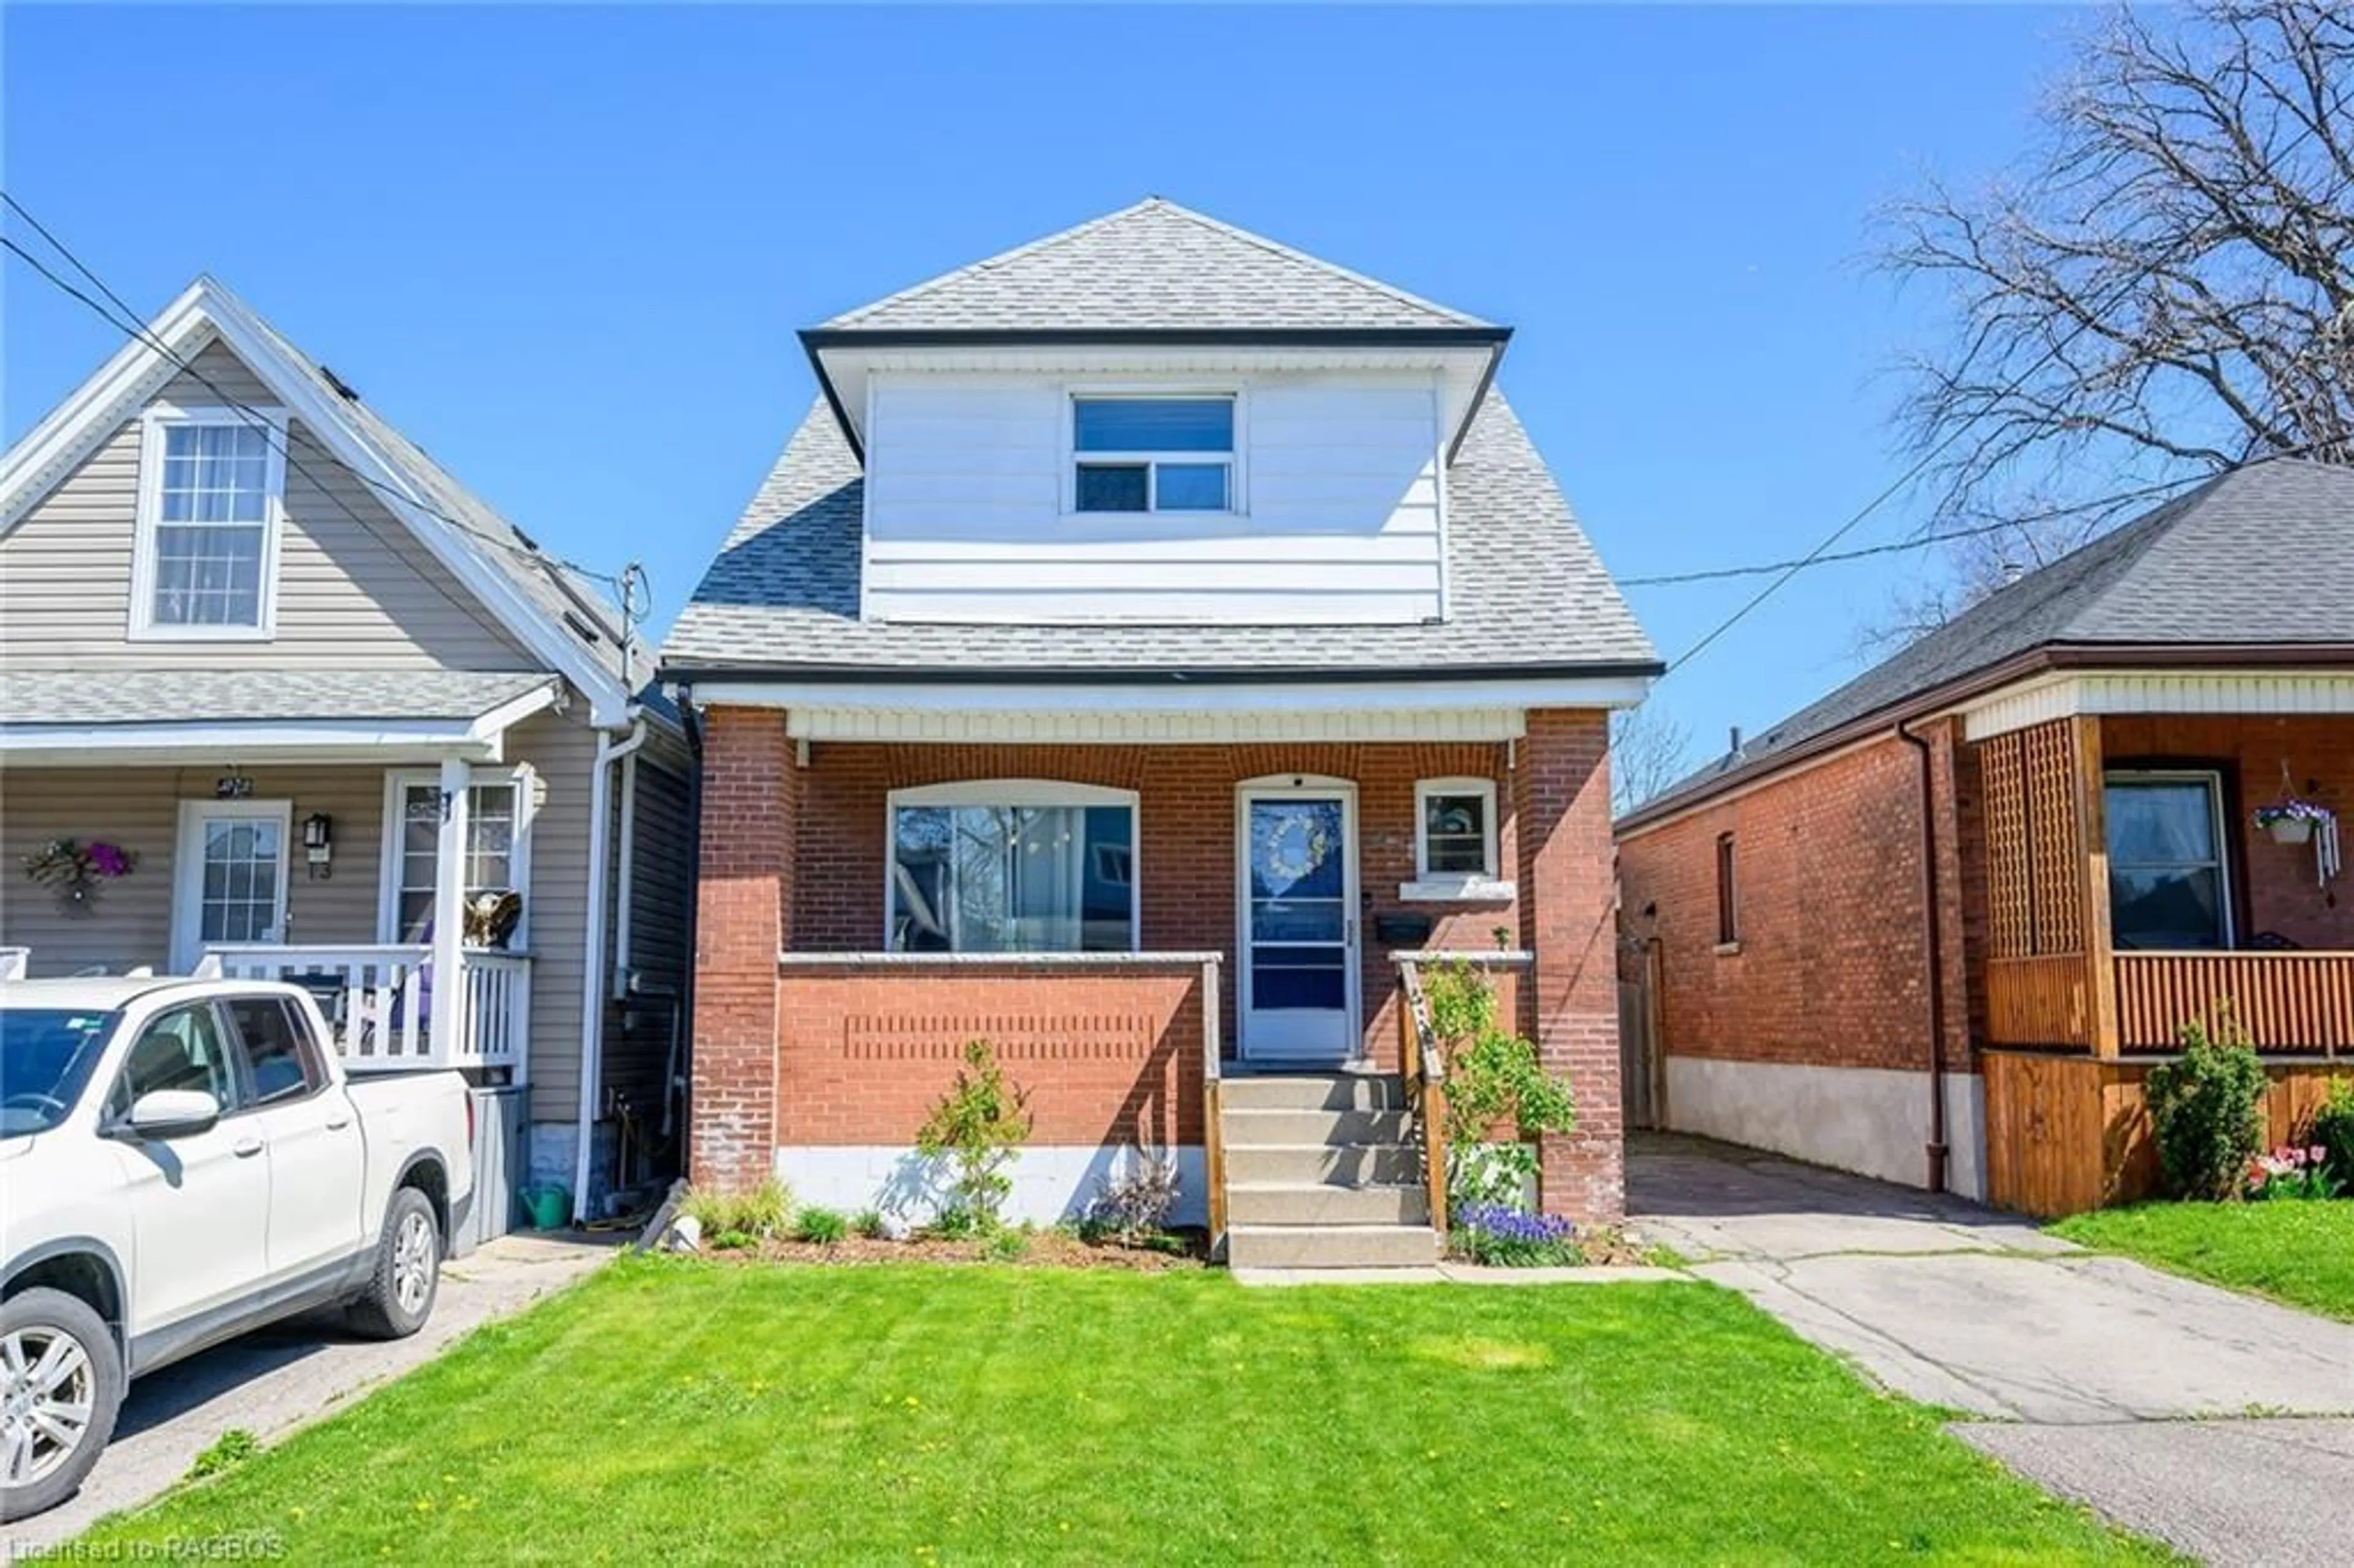 Home with brick exterior material for 15 Newlands Ave, Hamilton Ontario L8H 2T4